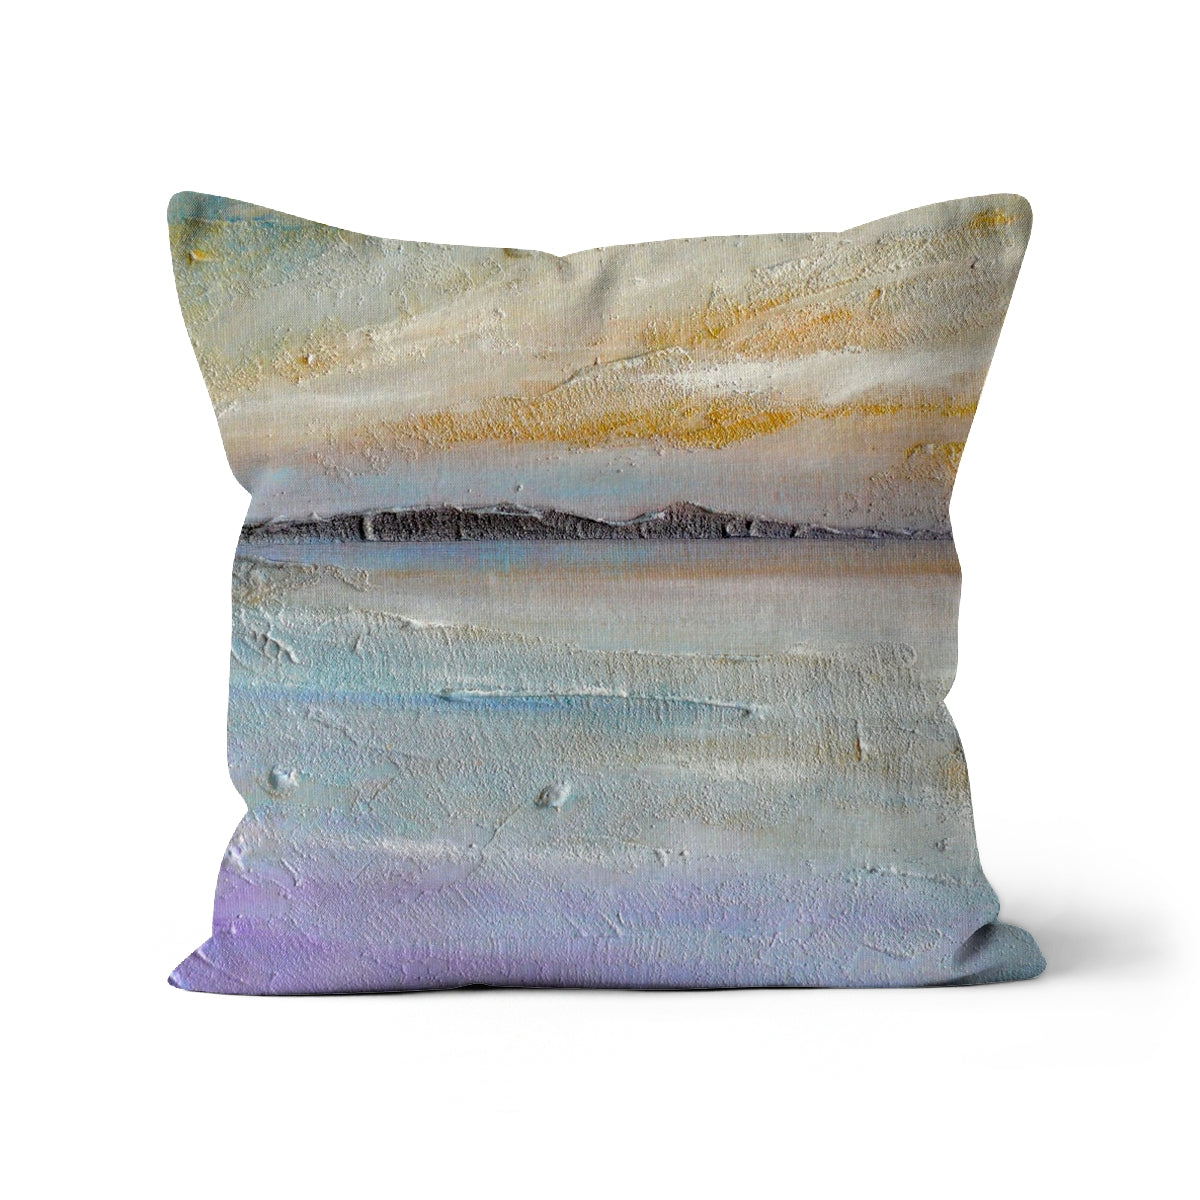 Sollas Beach South Uist Art Gifts Cushion-Cushions-Hebridean Islands Art Gallery-Linen-16"x16"-Paintings, Prints, Homeware, Art Gifts From Scotland By Scottish Artist Kevin Hunter